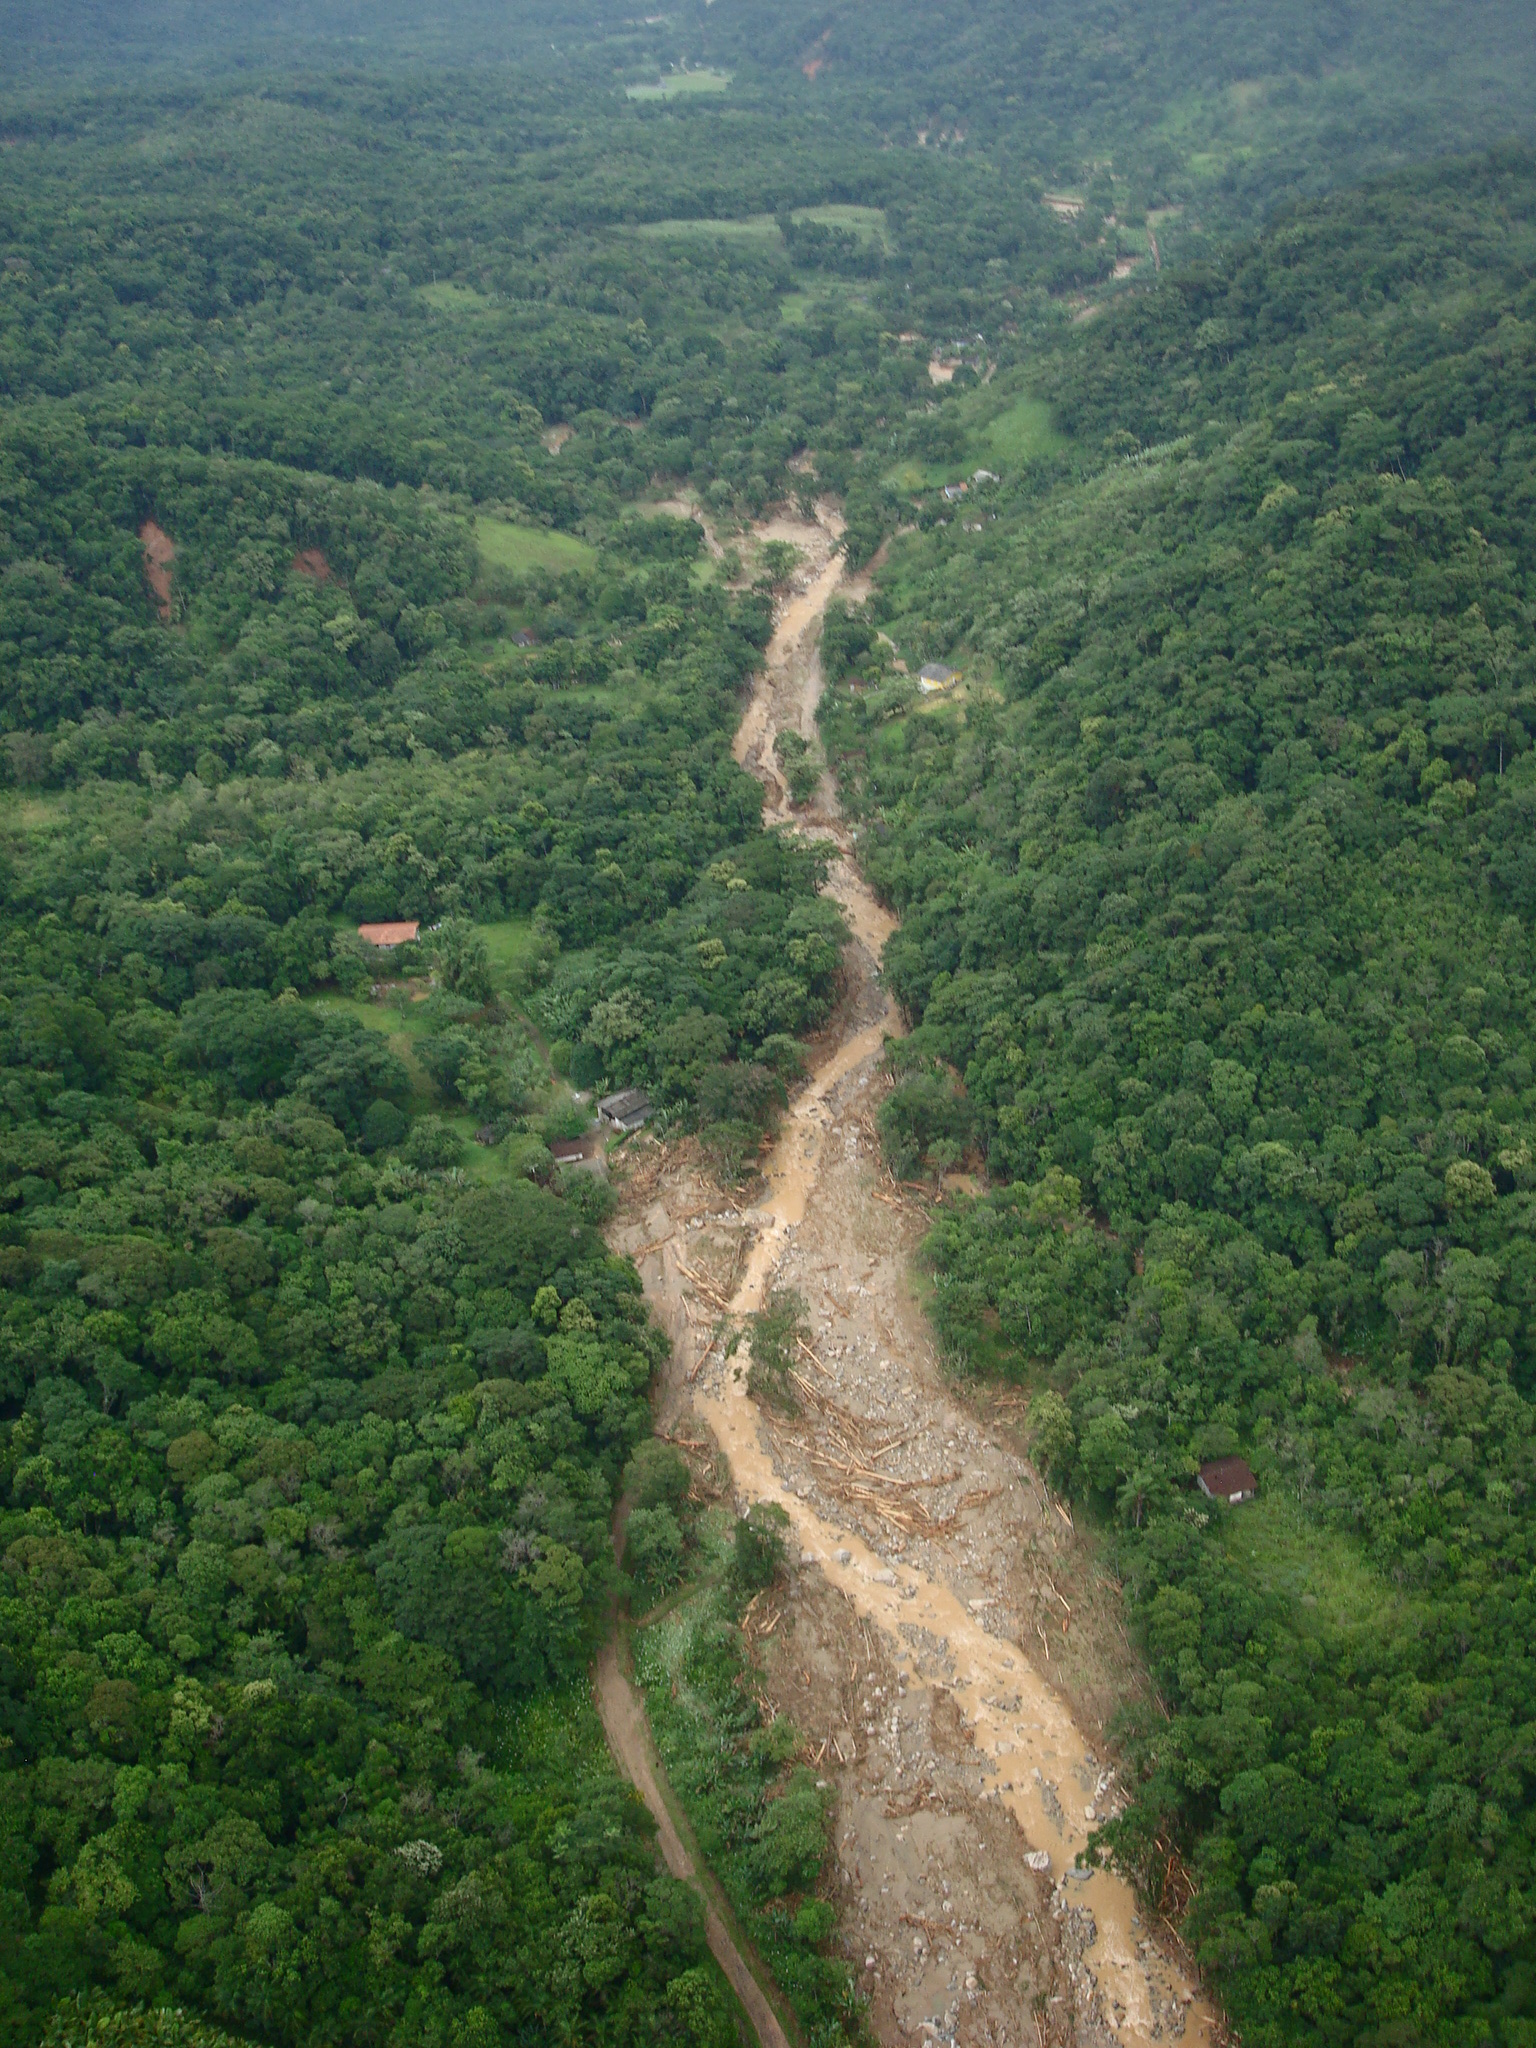 A channelised landslide triggered by the March 2011 rainfall event at Antonina and Morretes in Brazil